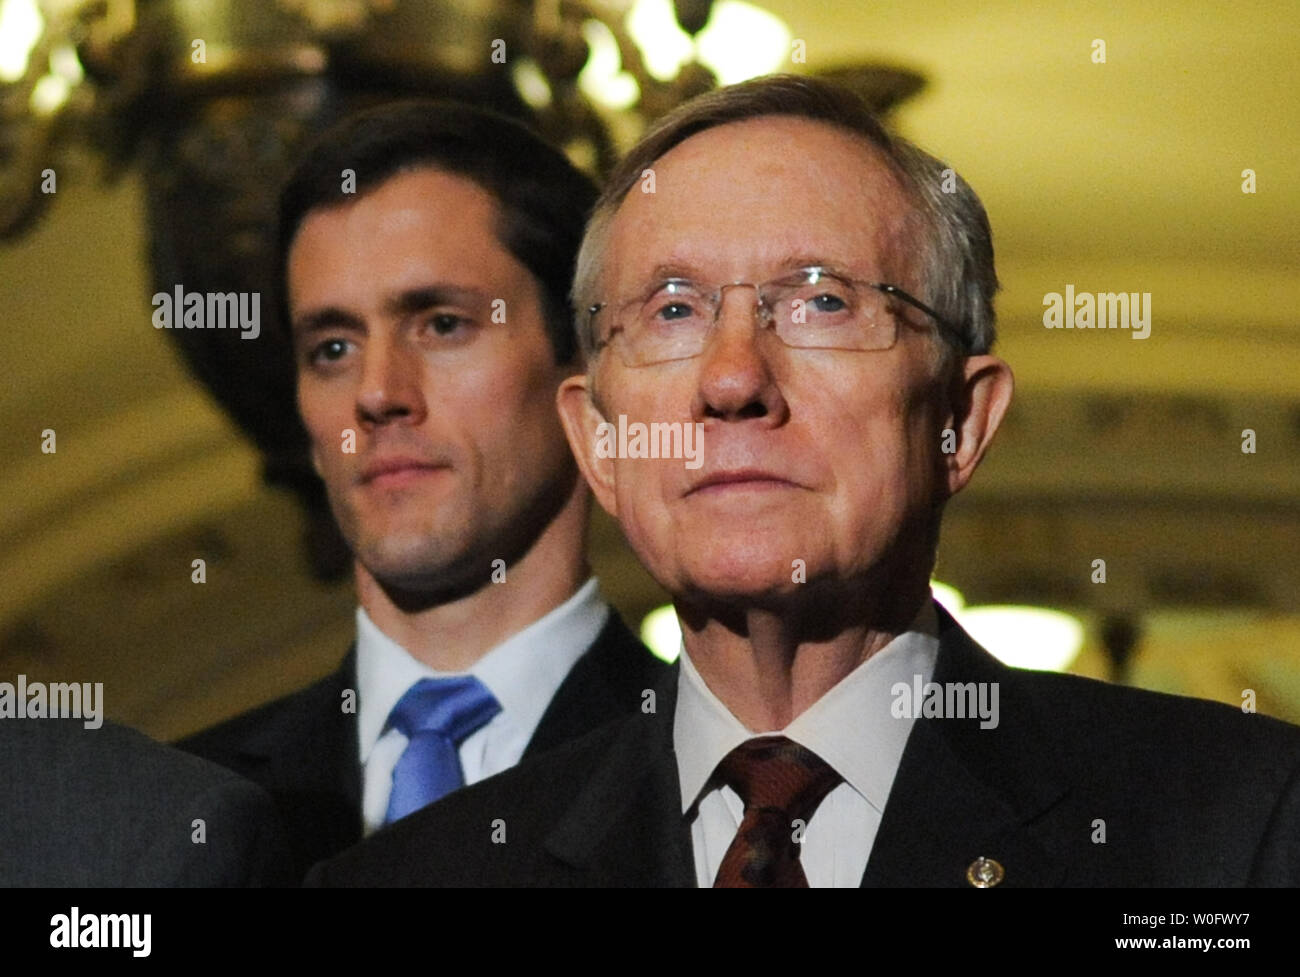 Senate Majority Leader Harry Reid (D-NV) (R) and Sen. Carte Goodwin (D-WV) (2nd R) sworn-in today to replace the late Sen. Robert Byrd, attend a press conference after the Senate voted 60-40 to approve an extension of unemployment benefits on Capitol Hill in Washington on July 20, 2010. UPI/Alexis C. Glenn Stock Photo